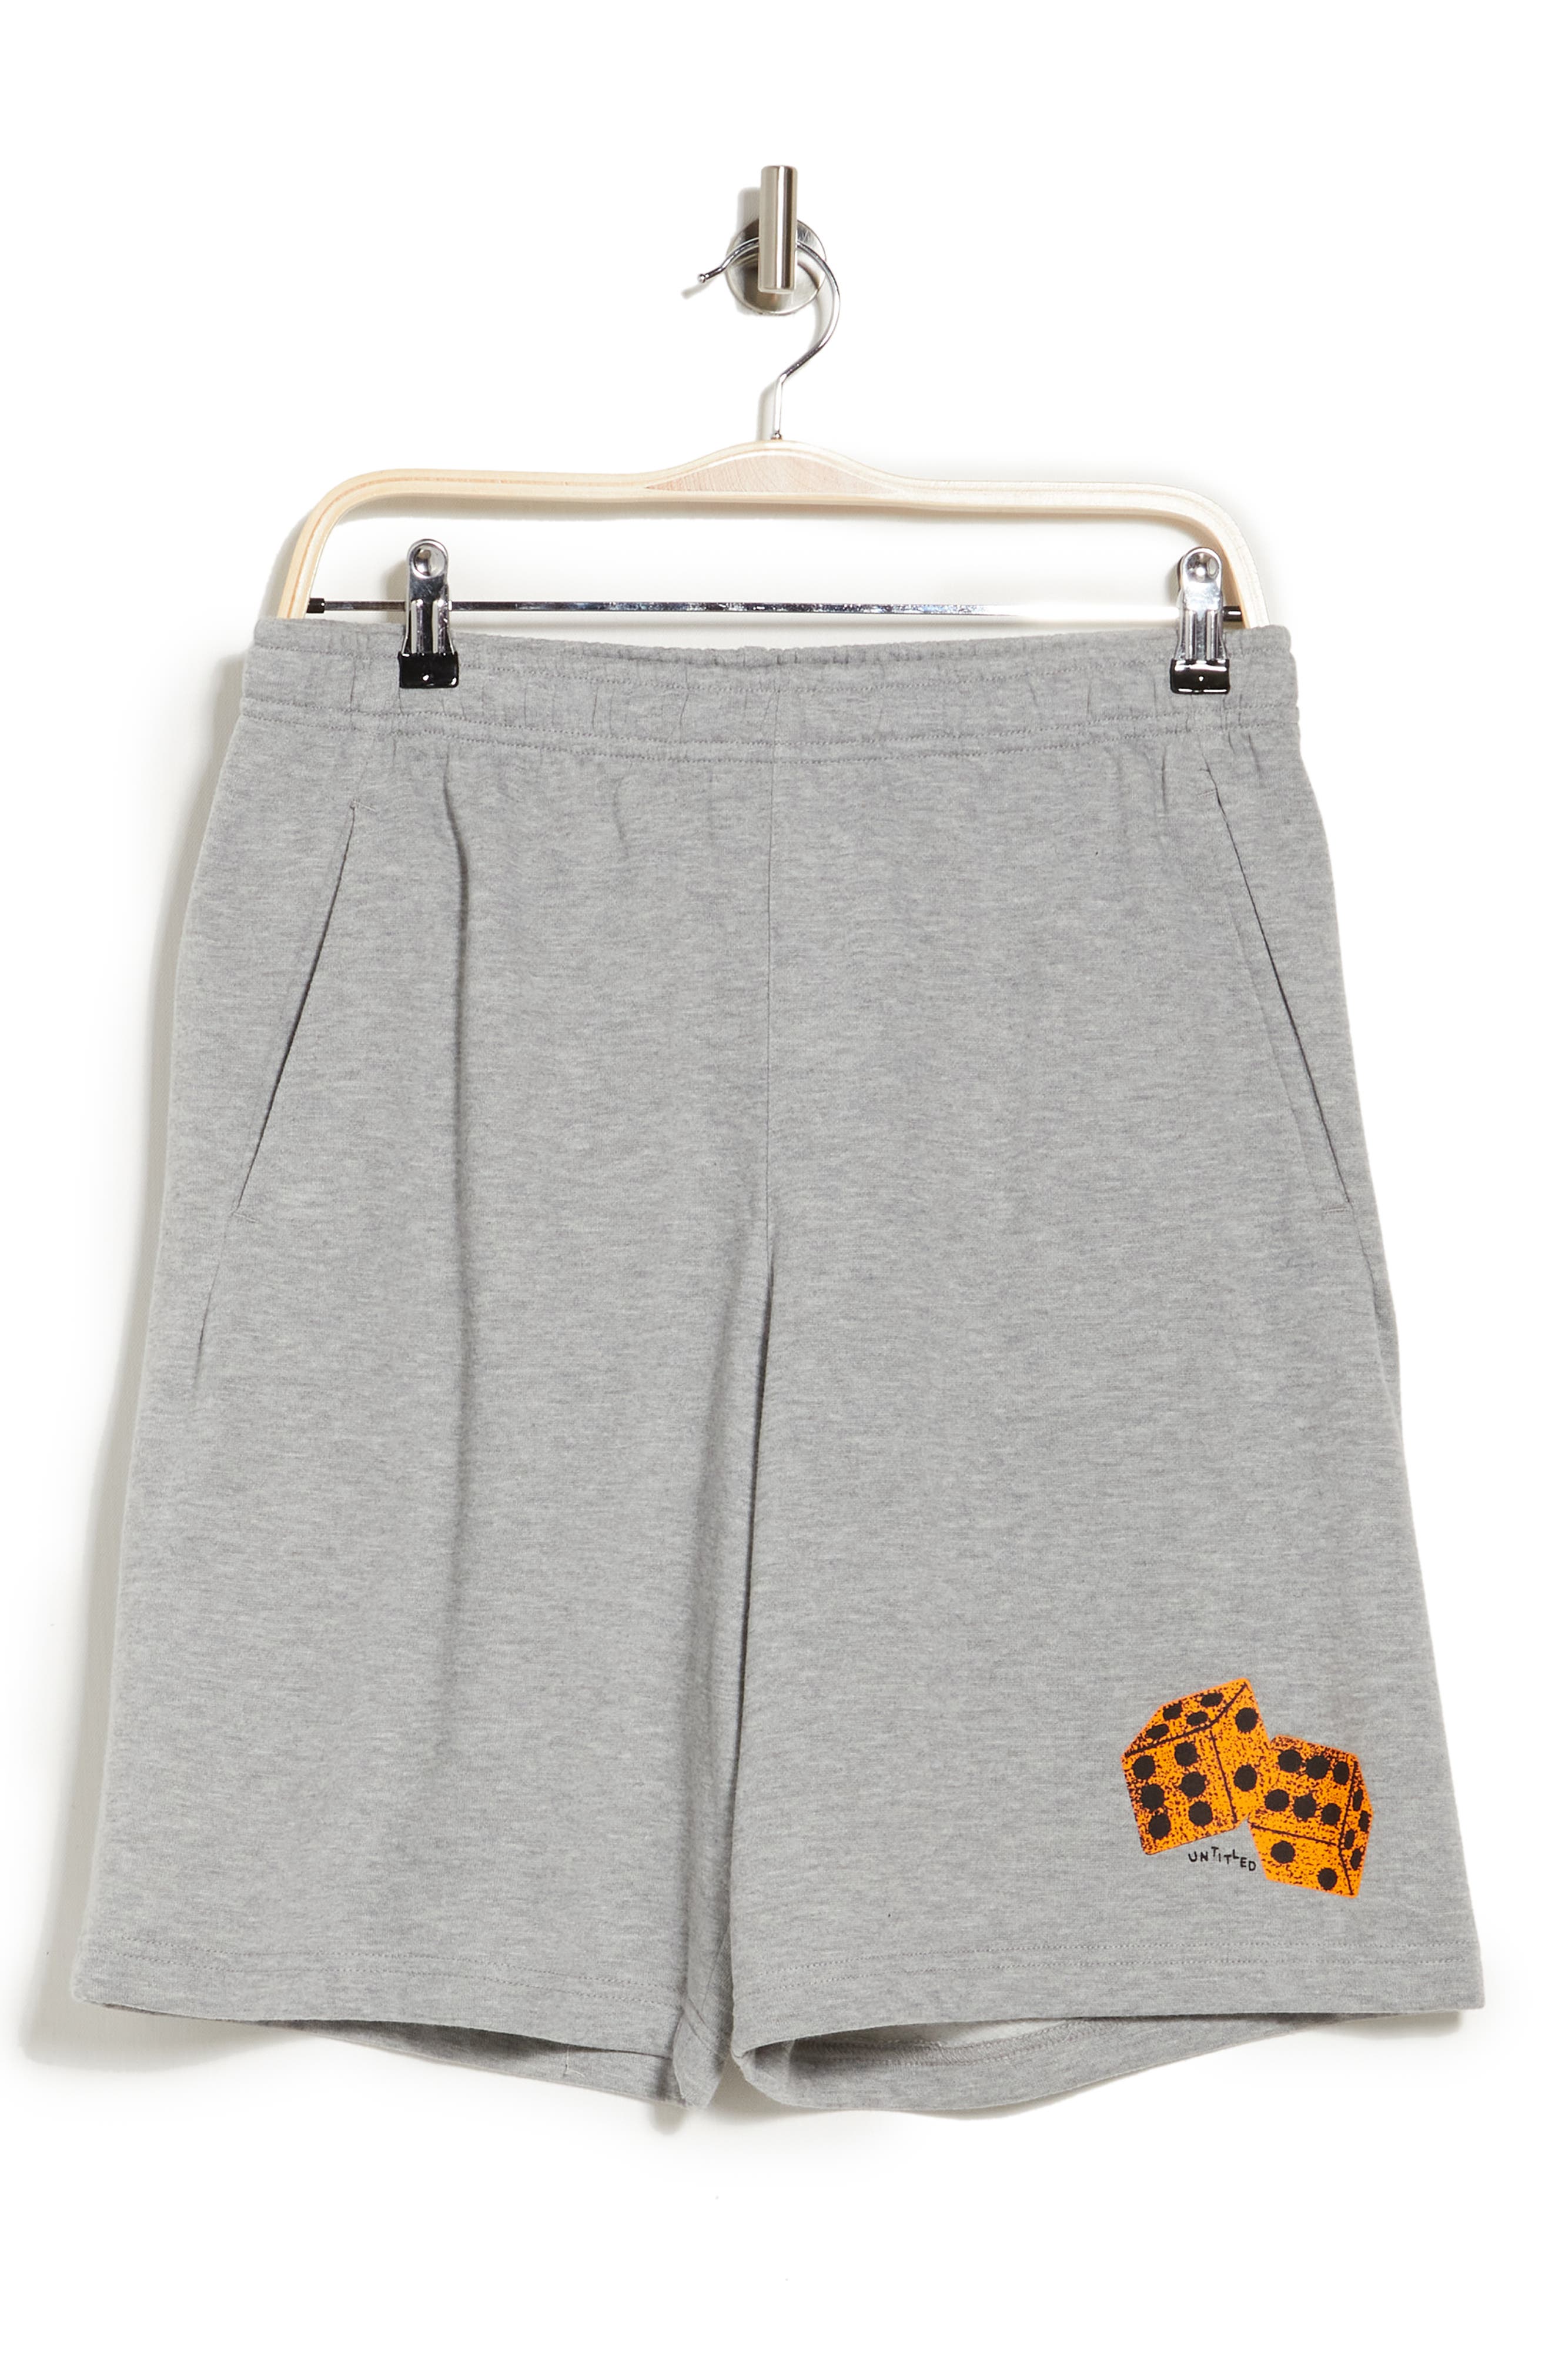 Designs Untitled Dice Graphic Shorts In Grey